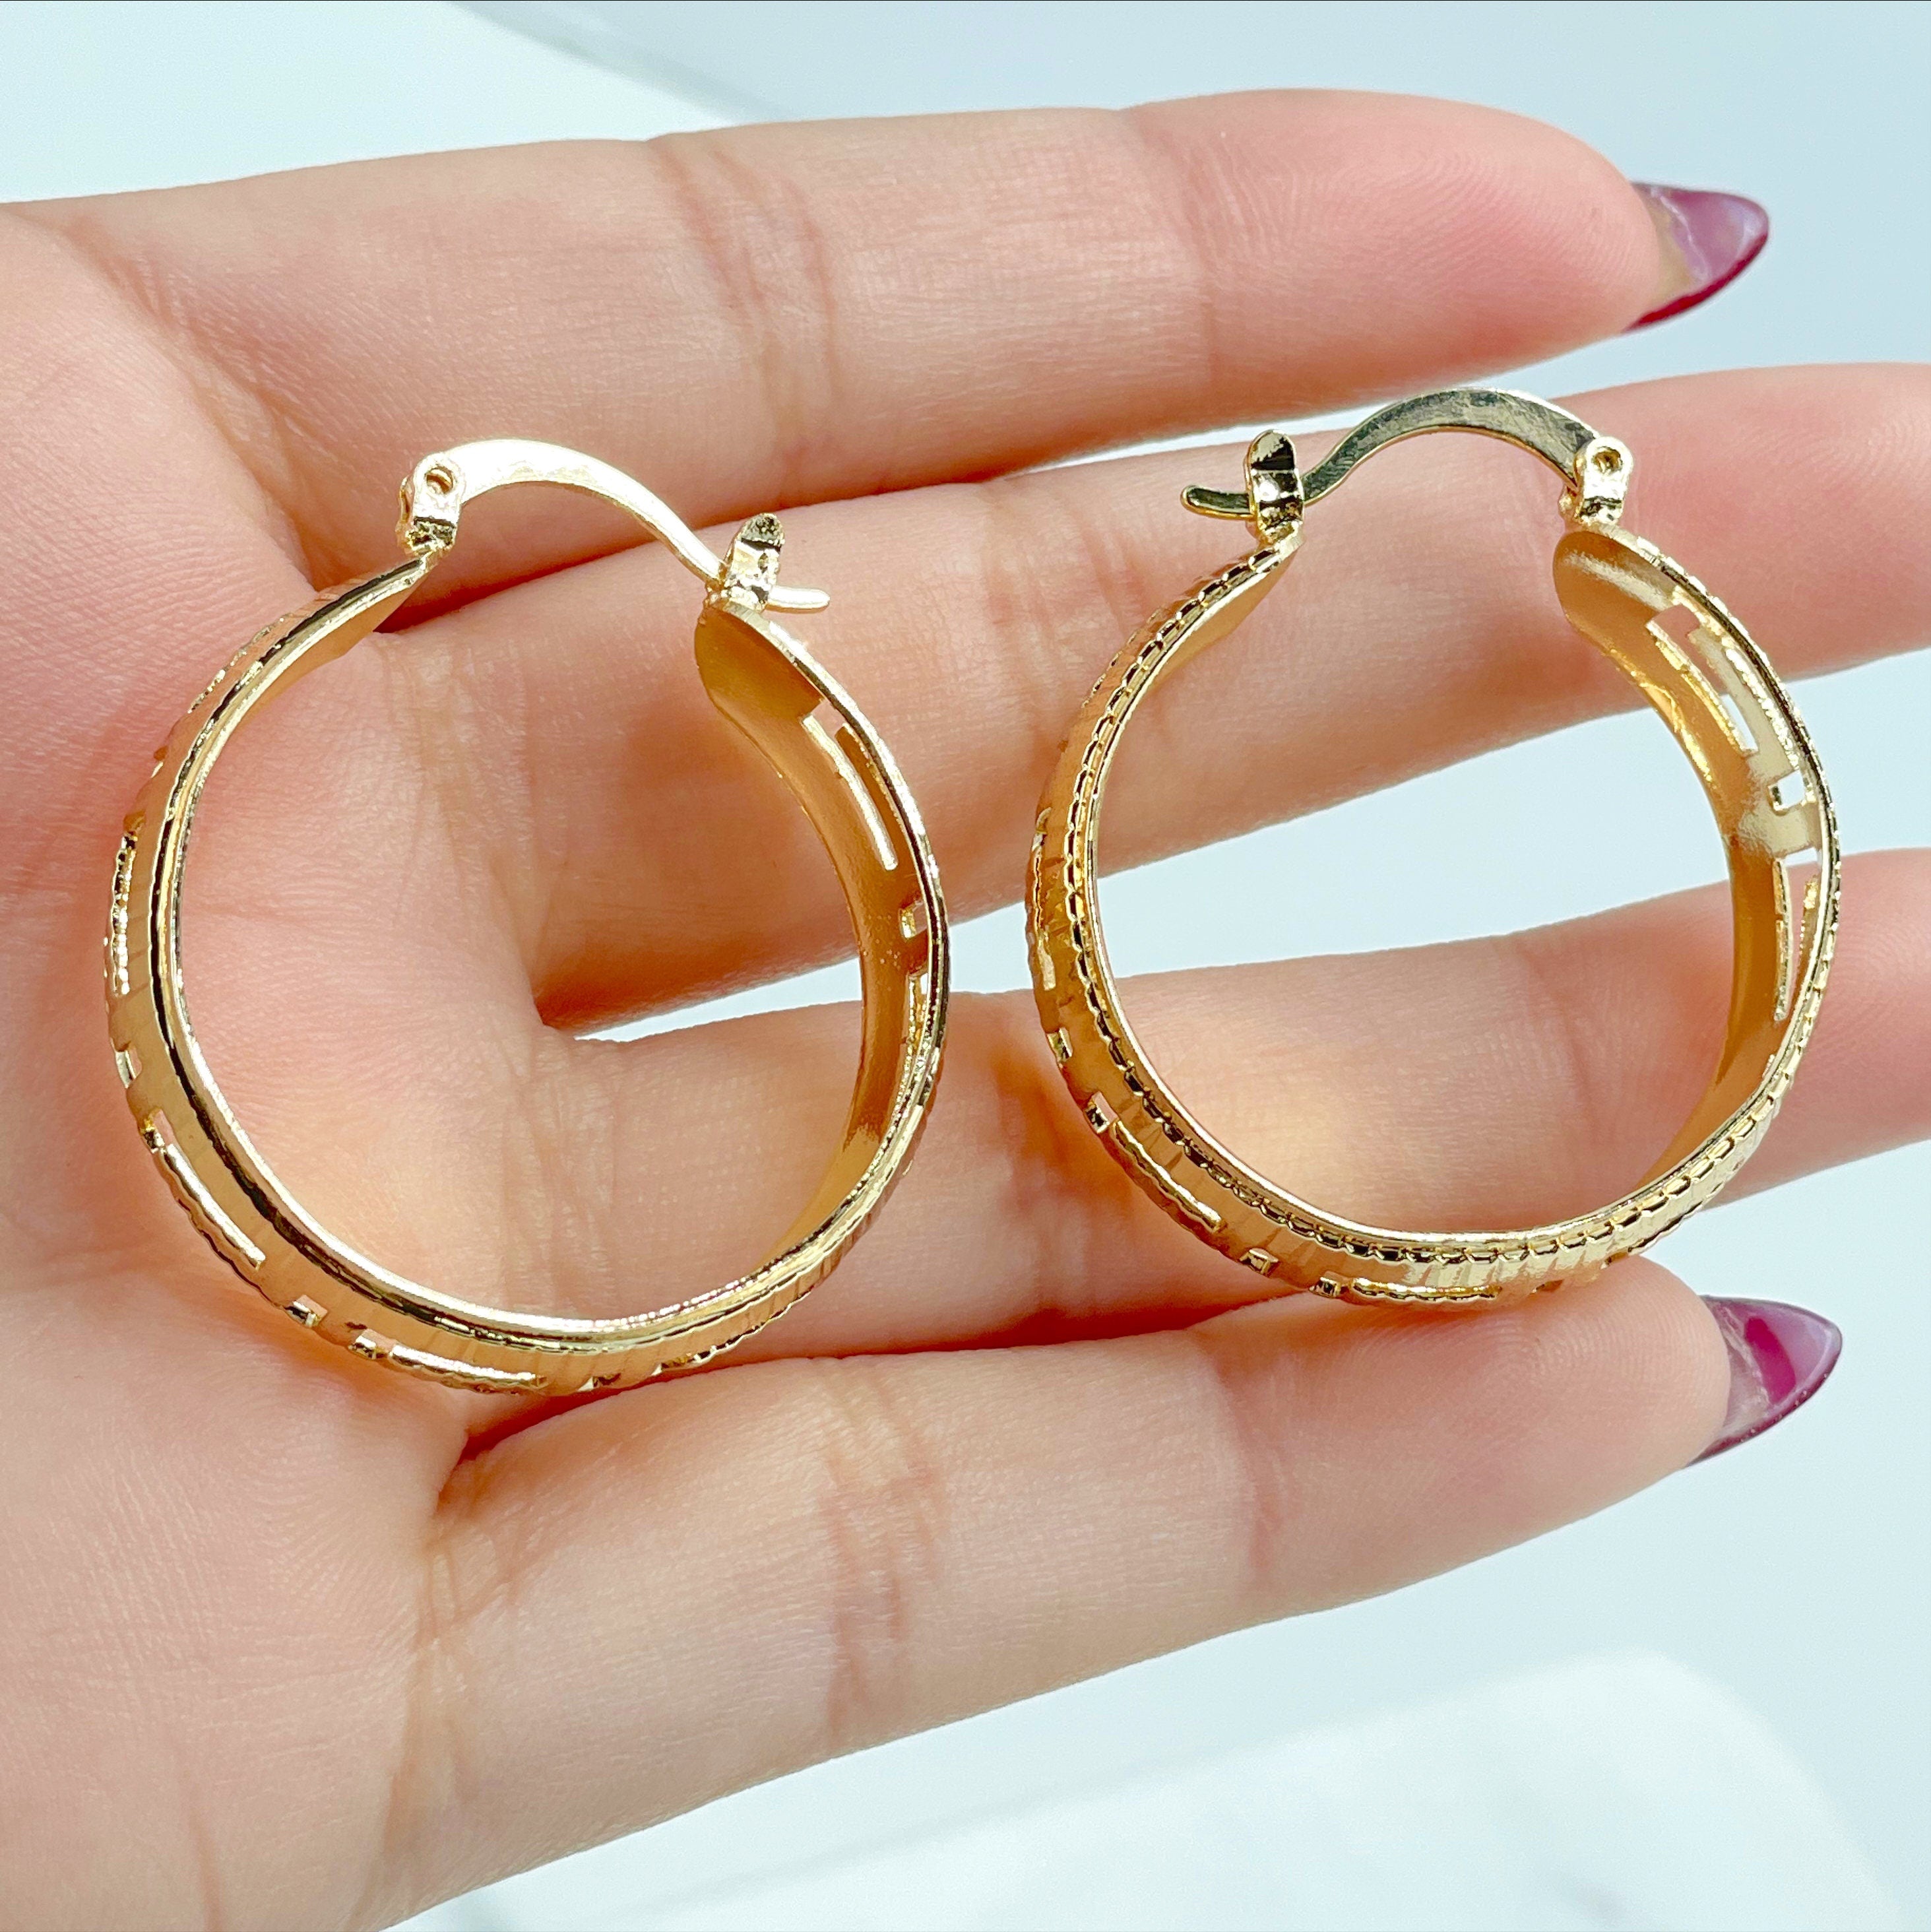 18K Gold Plated Small Hoop Earrings - Iced Out Hiphop Jewelry, VVS Moi –  peardedesign.com